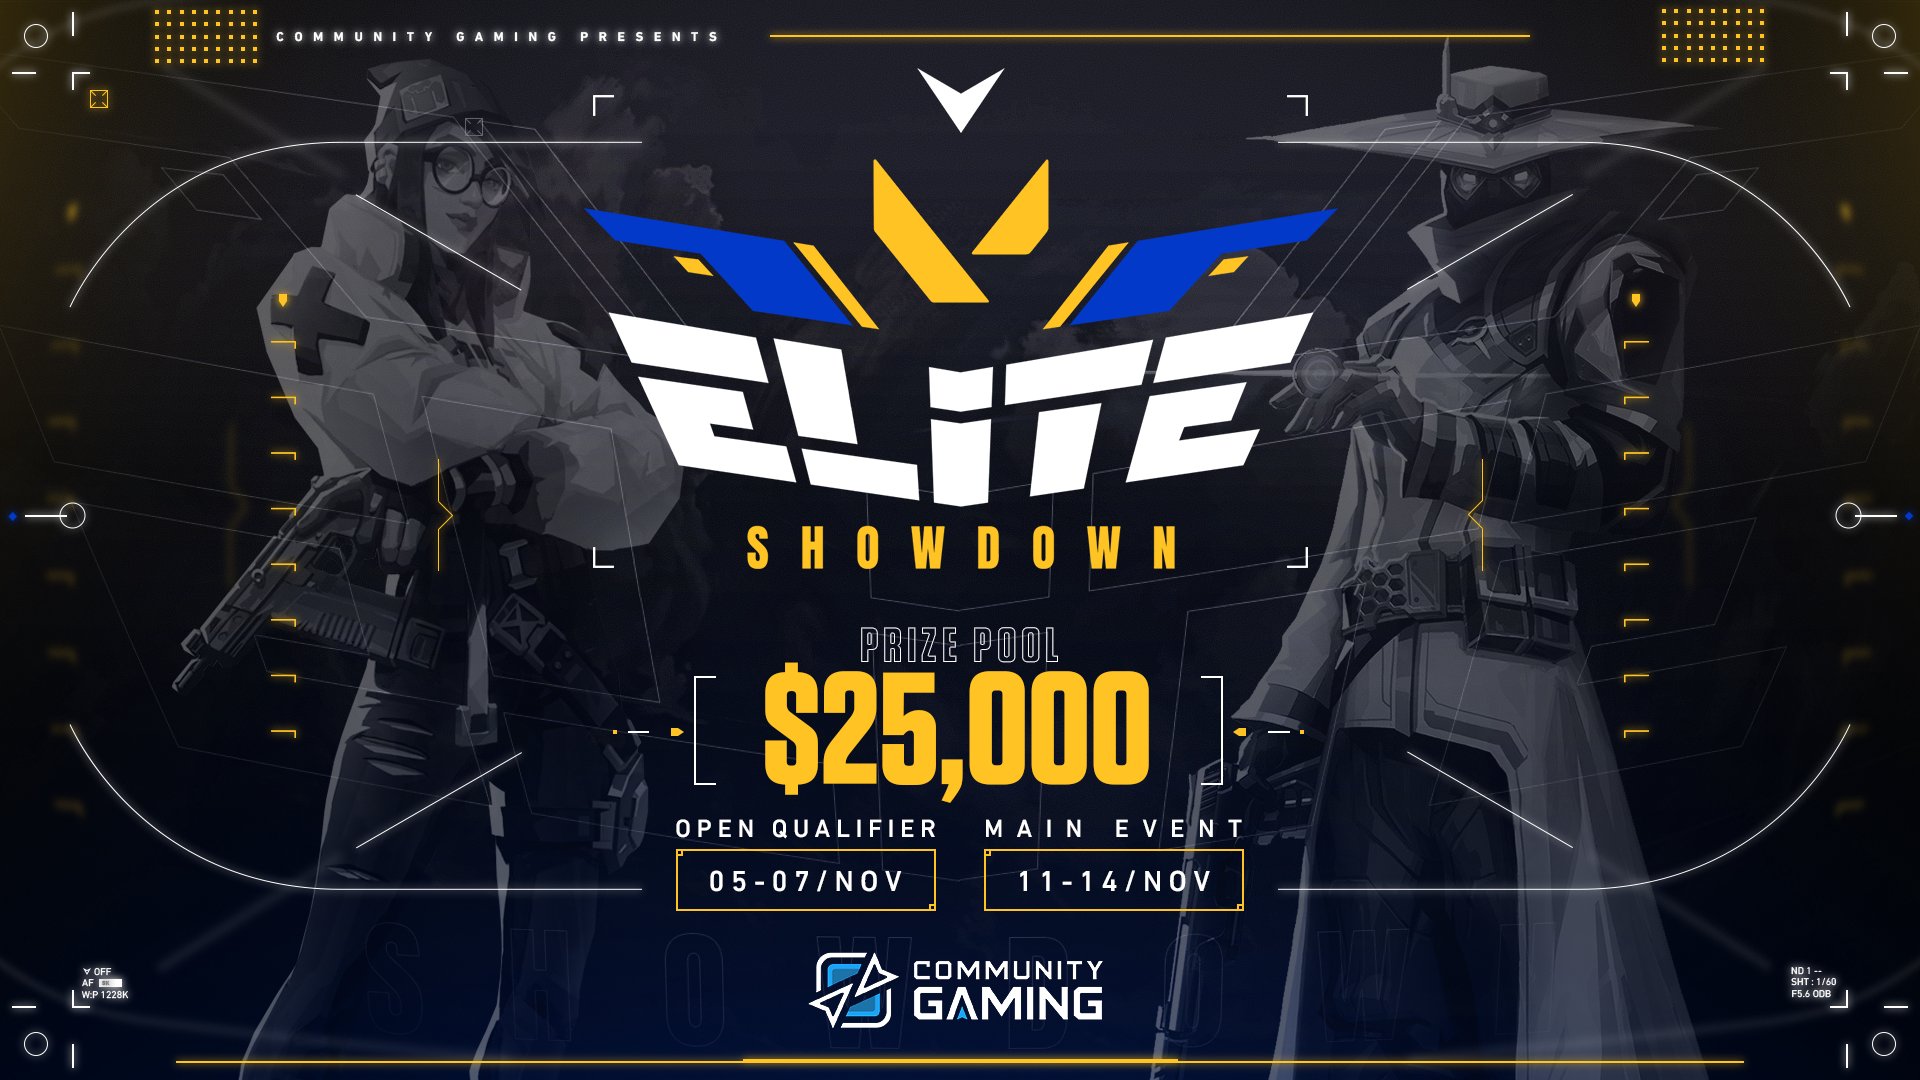 Community Gaming partners with Riot Games for VALORANT Elite Showdown thumbnail